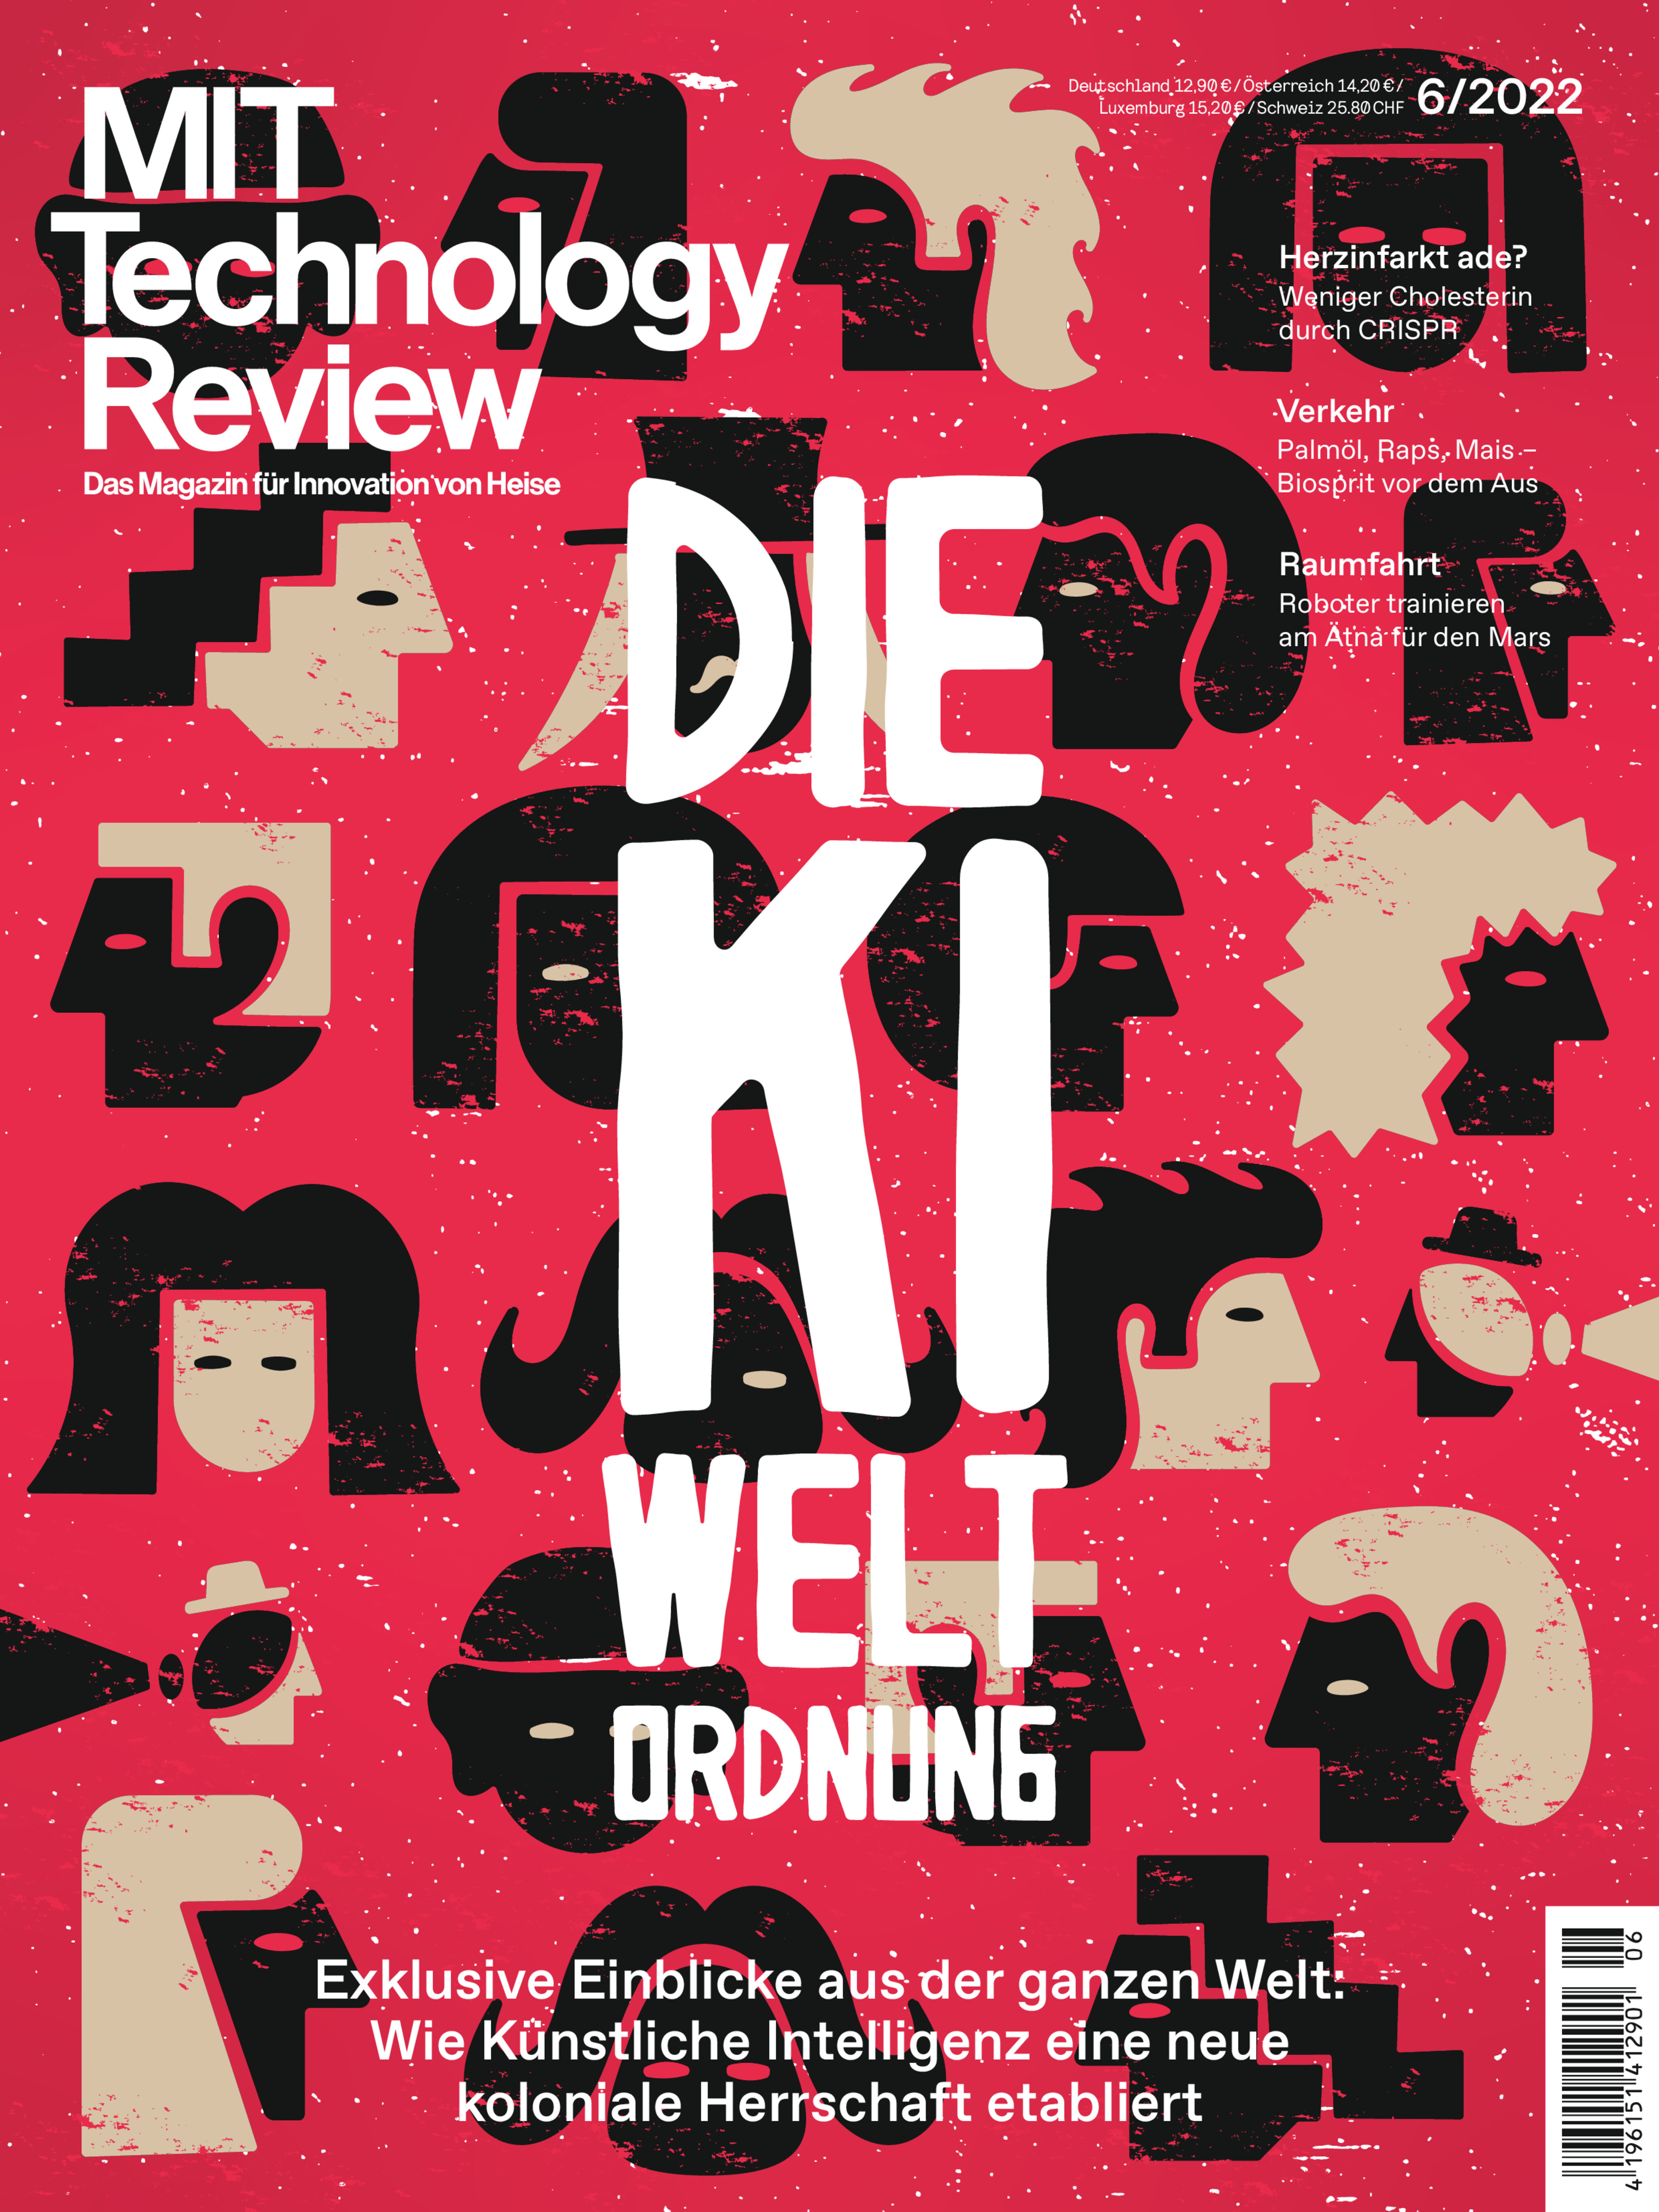 MIT Technology Review 06/2022